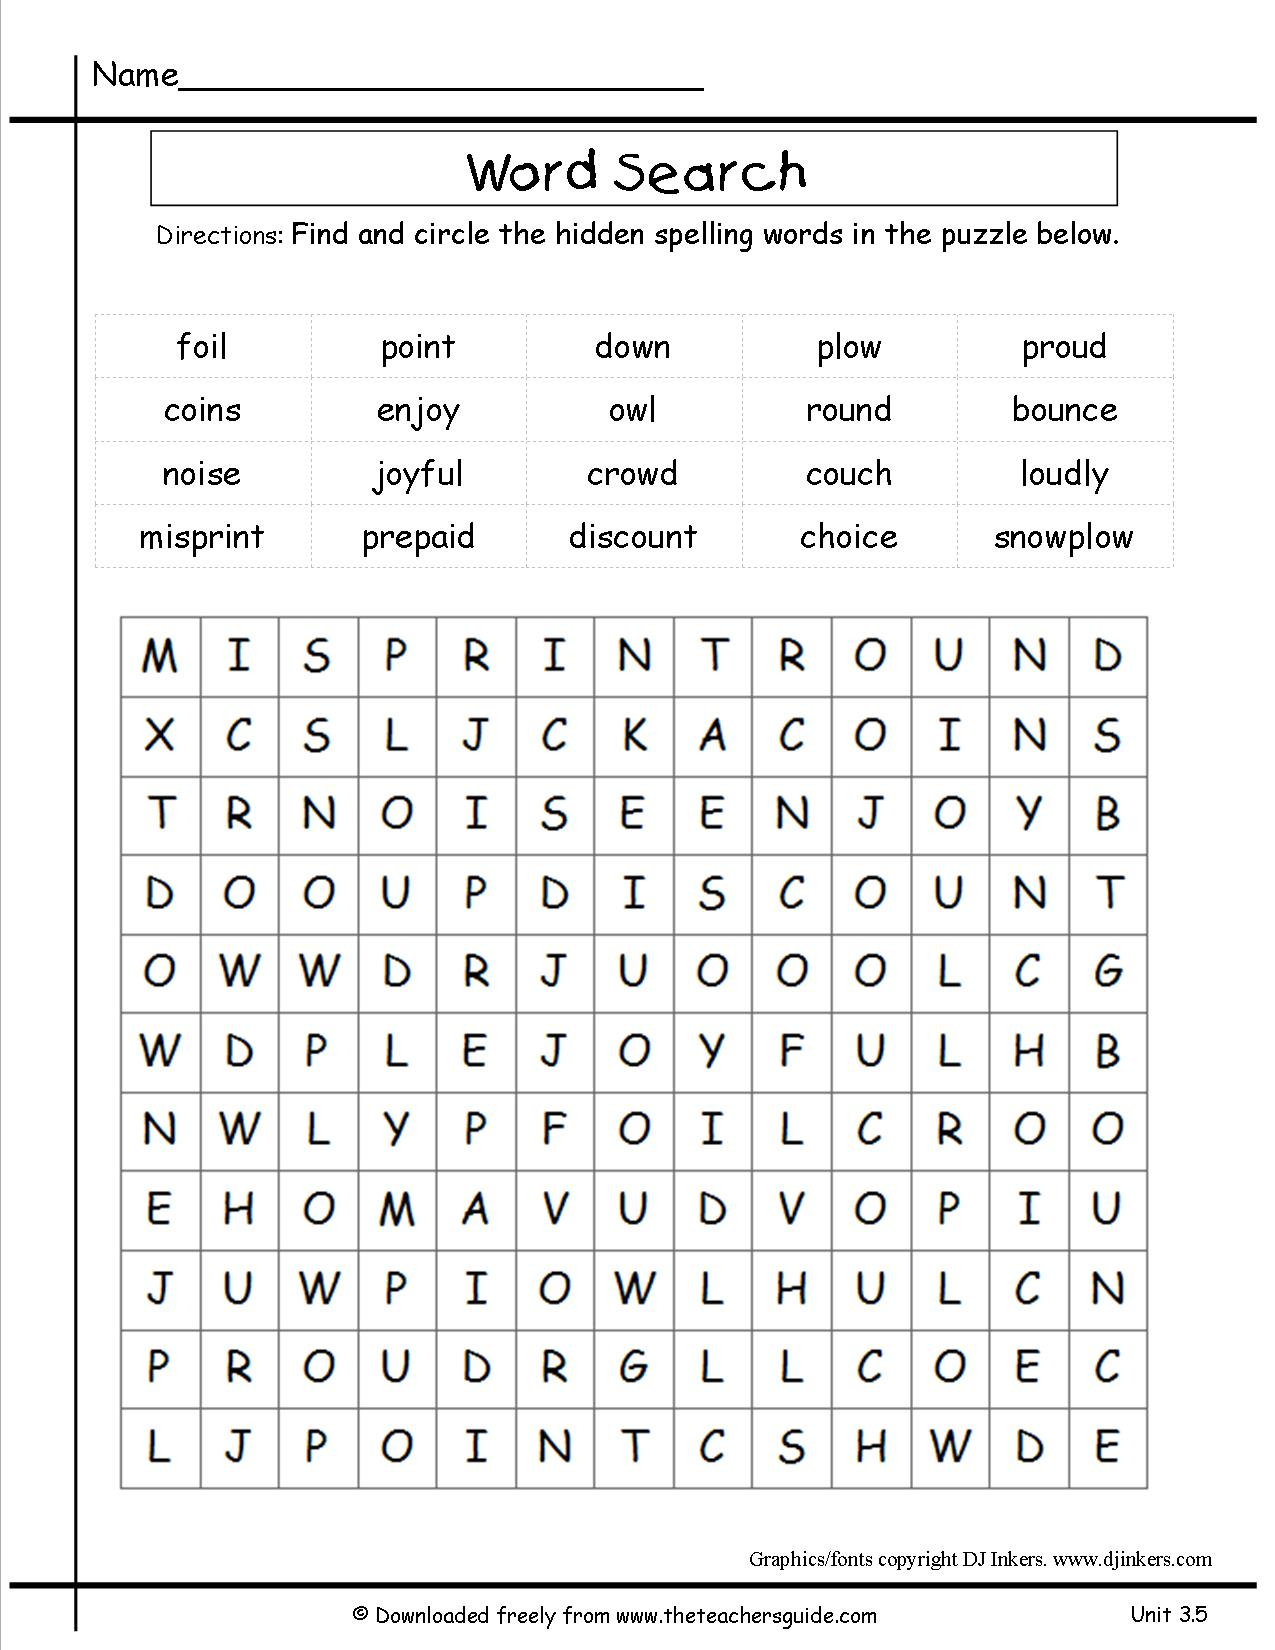 14 Best Images Of Matching Definitions To Words Worksheets 3rd Grade 